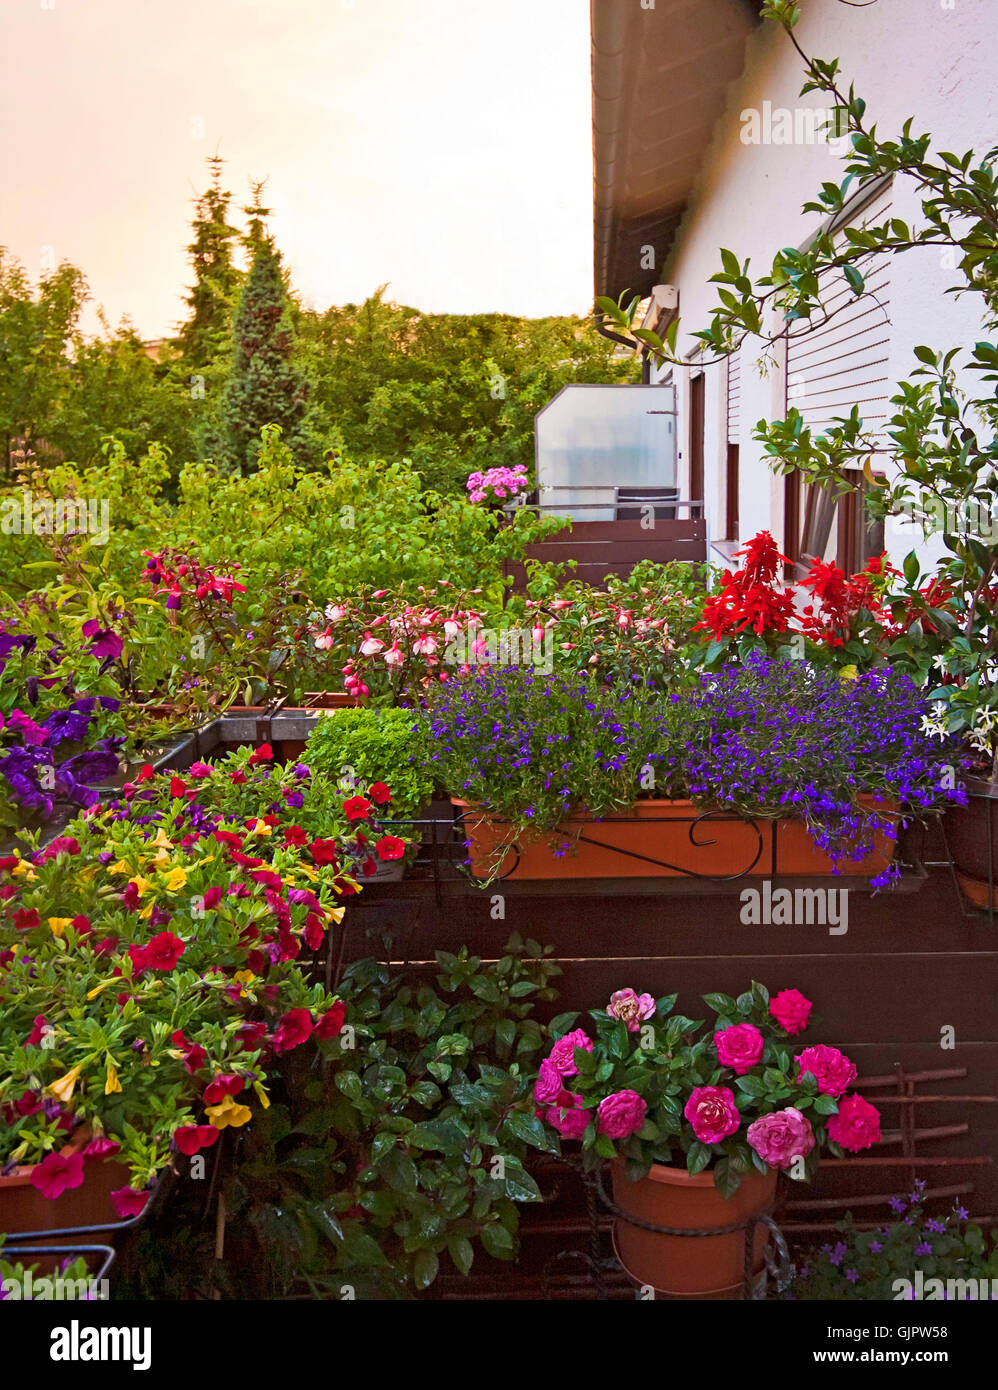 Gardening at home, balcony in springtime full of blooming flowers and plants. Stock Photo